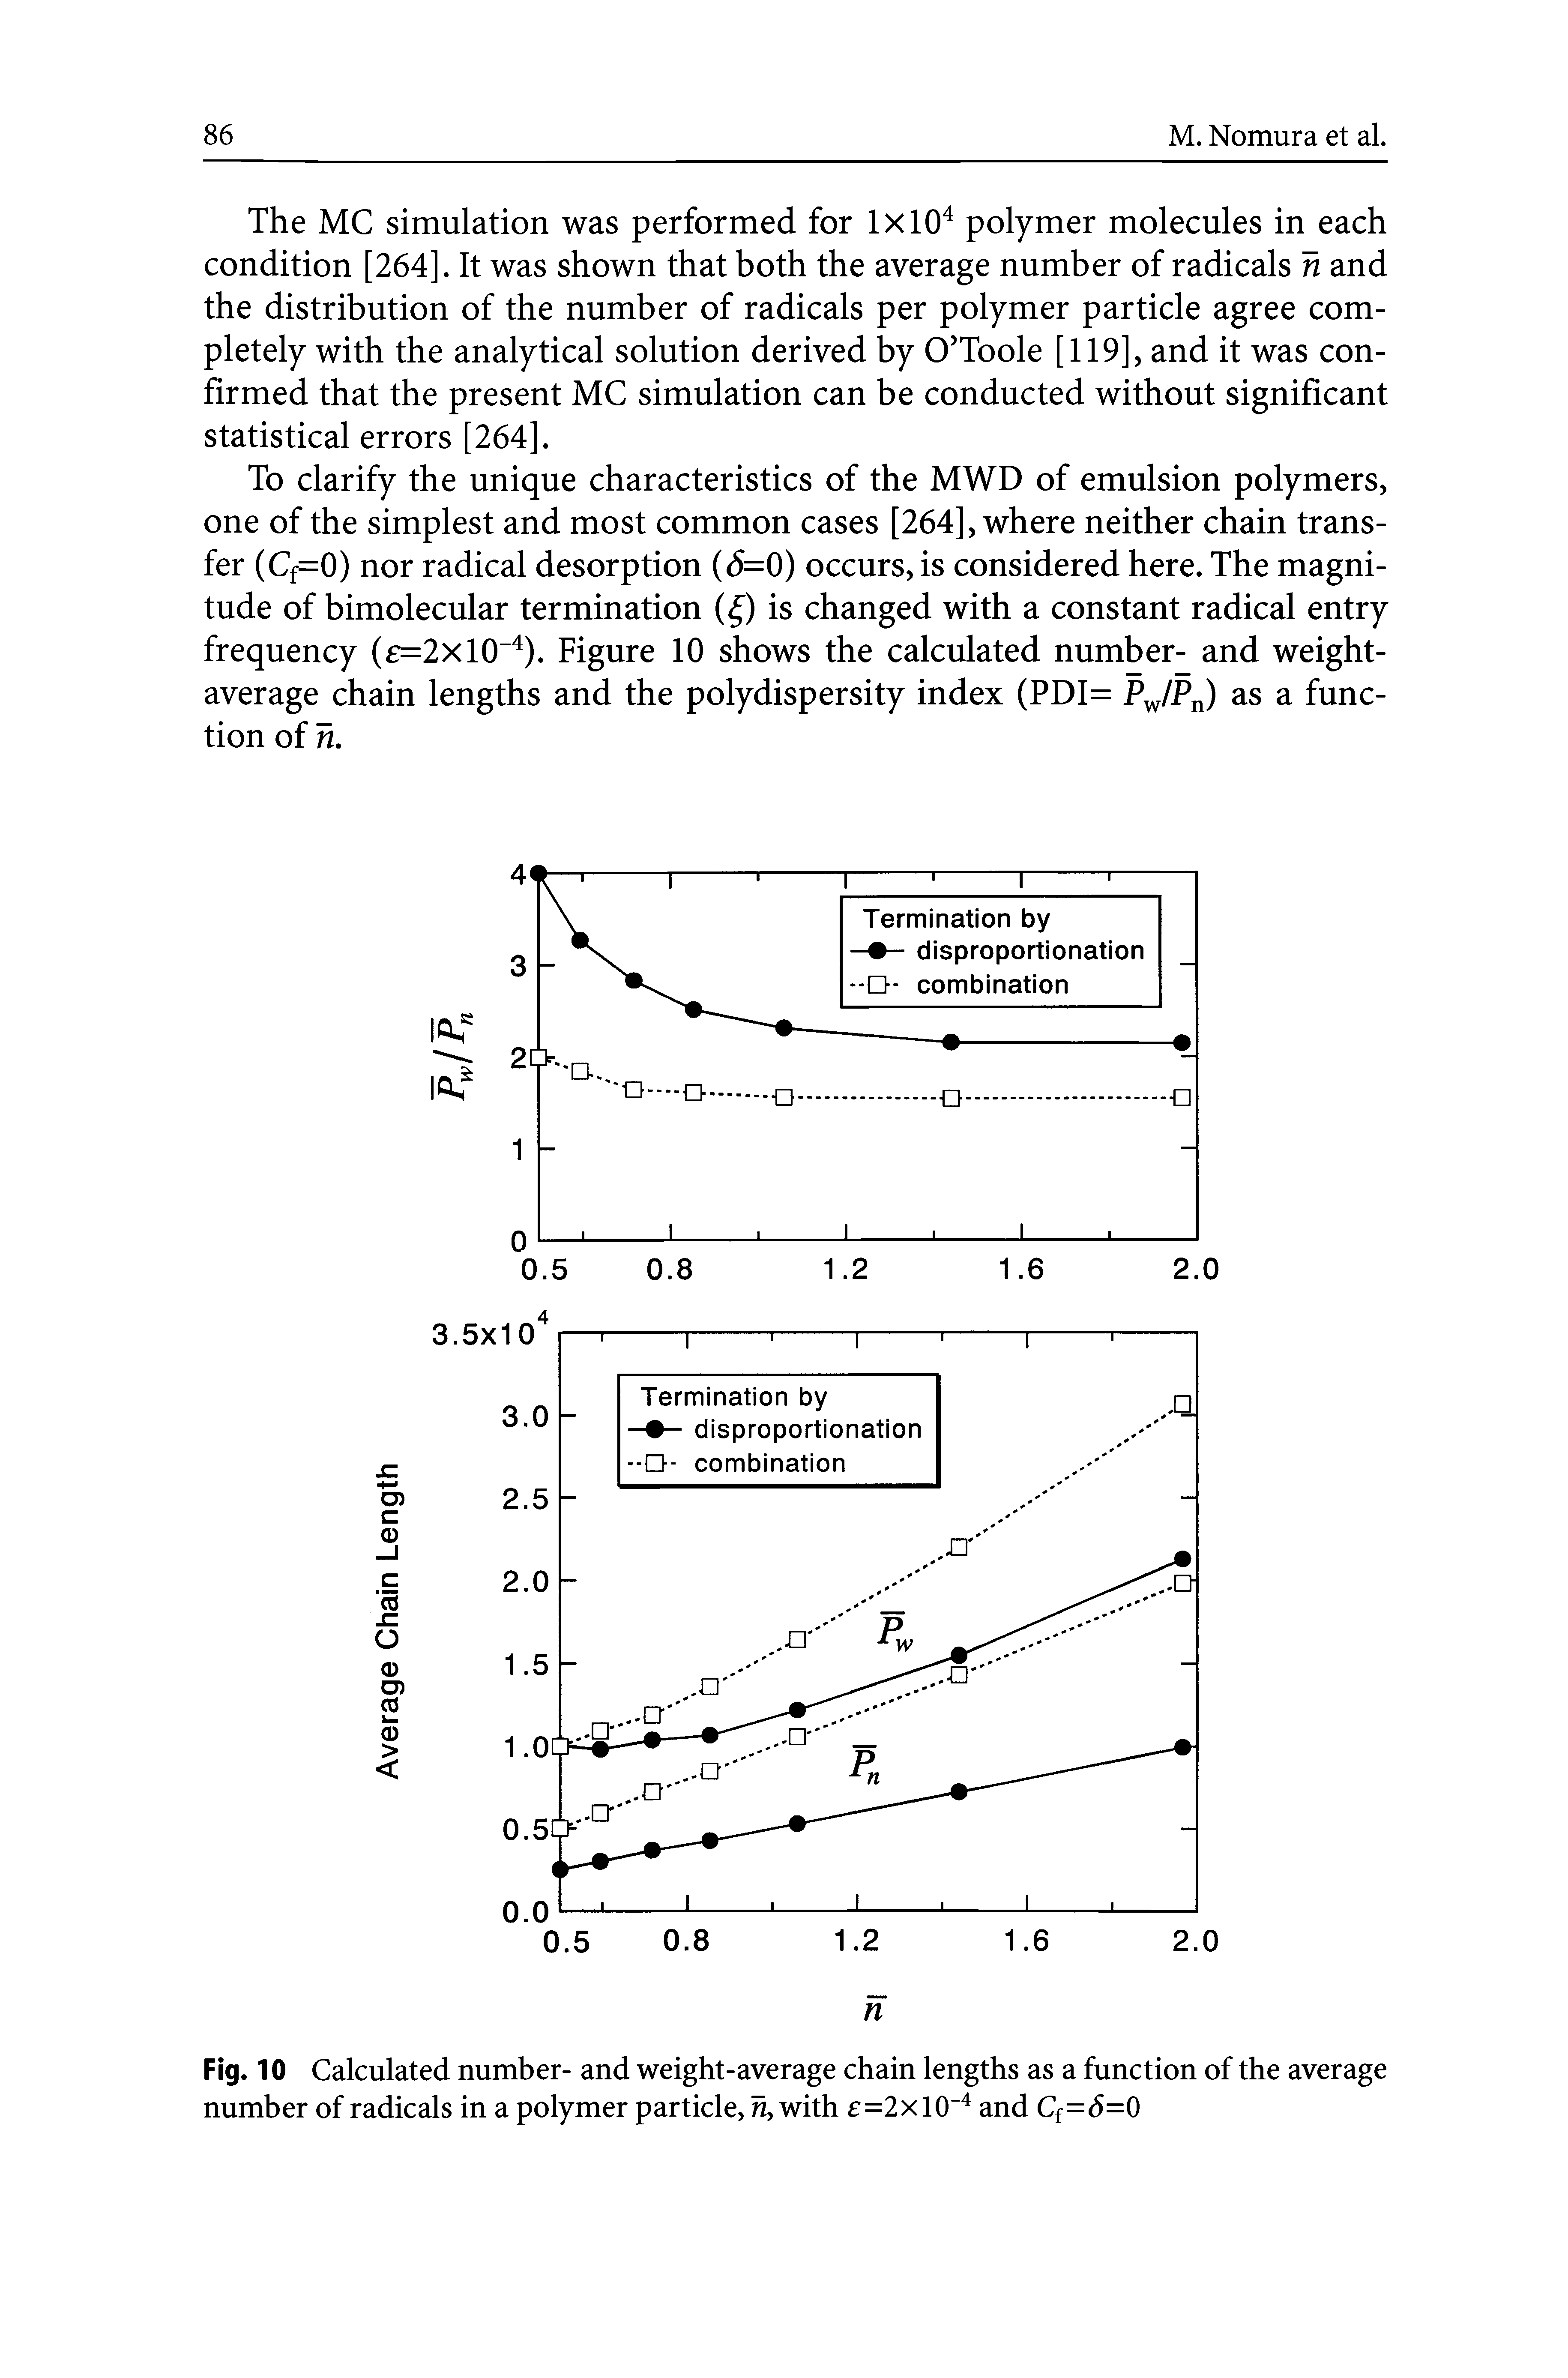 Fig. 10 Calculated number- and weight-average chain lengths as a function of the average number of radicals in a polymer particle, n, with c=2xl0" and Cf=S=0...